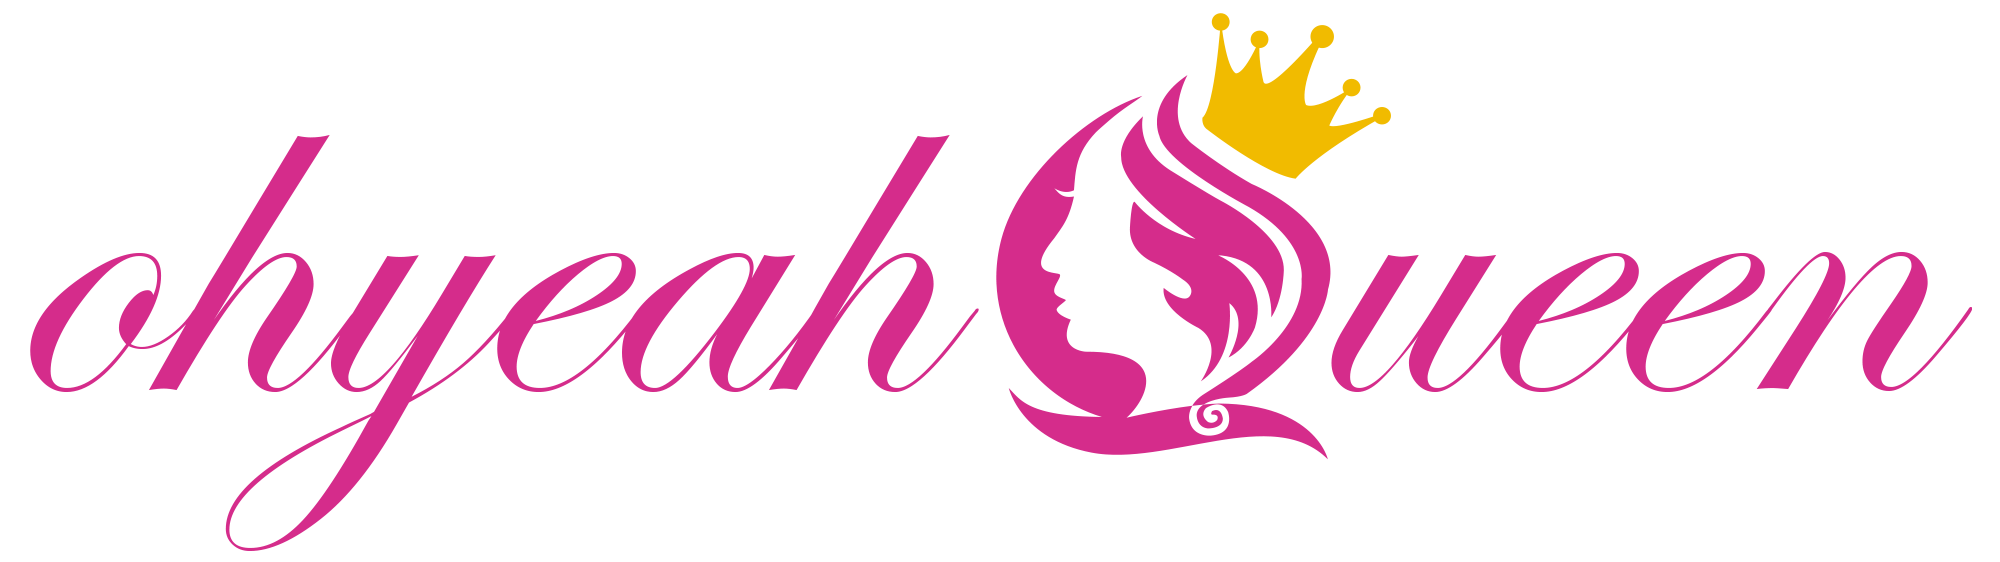 Ohyeahqueen Lingerie coupons logo